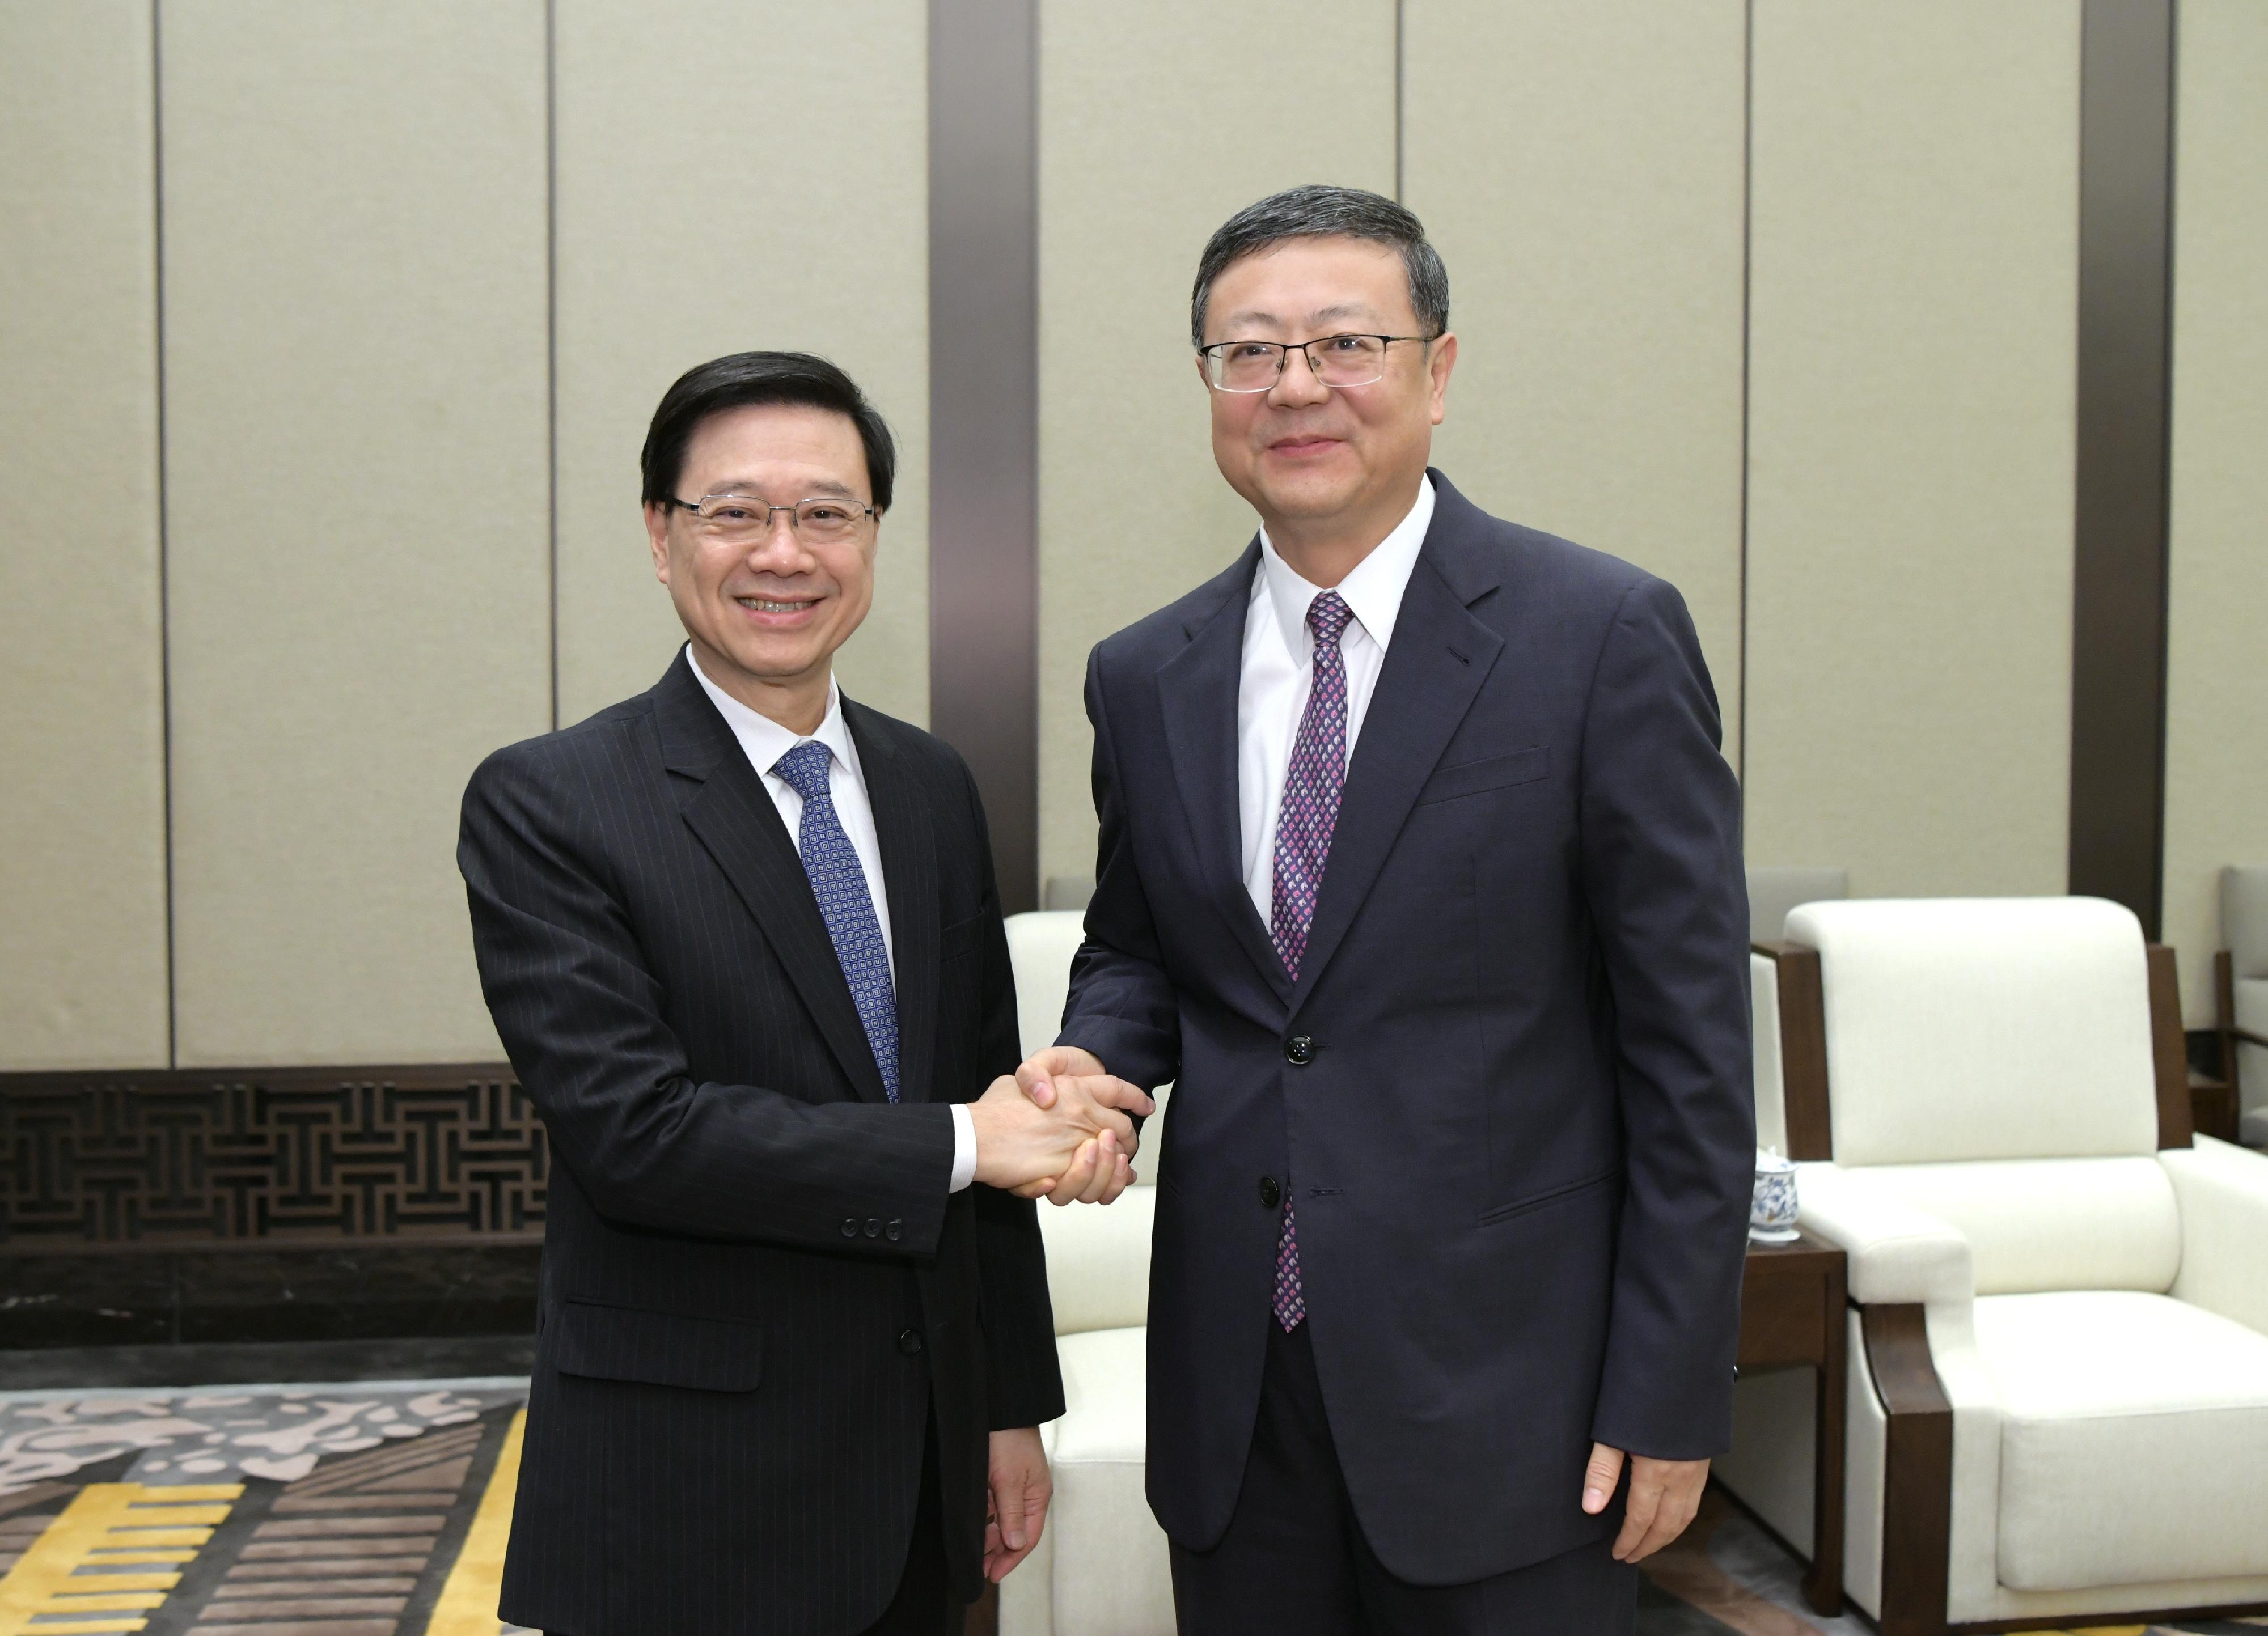 The Chief Executive, Mr John Lee, met with the Secretary of the CPC Shanghai Municipal Committee, Mr Chen Jining, and the Mayor of Shanghai, Mr Gong Zheng, in Shanghai today (November 4). Photo shows Mr Lee (left) shaking hands with Mr Chen (right) before the meeting. 